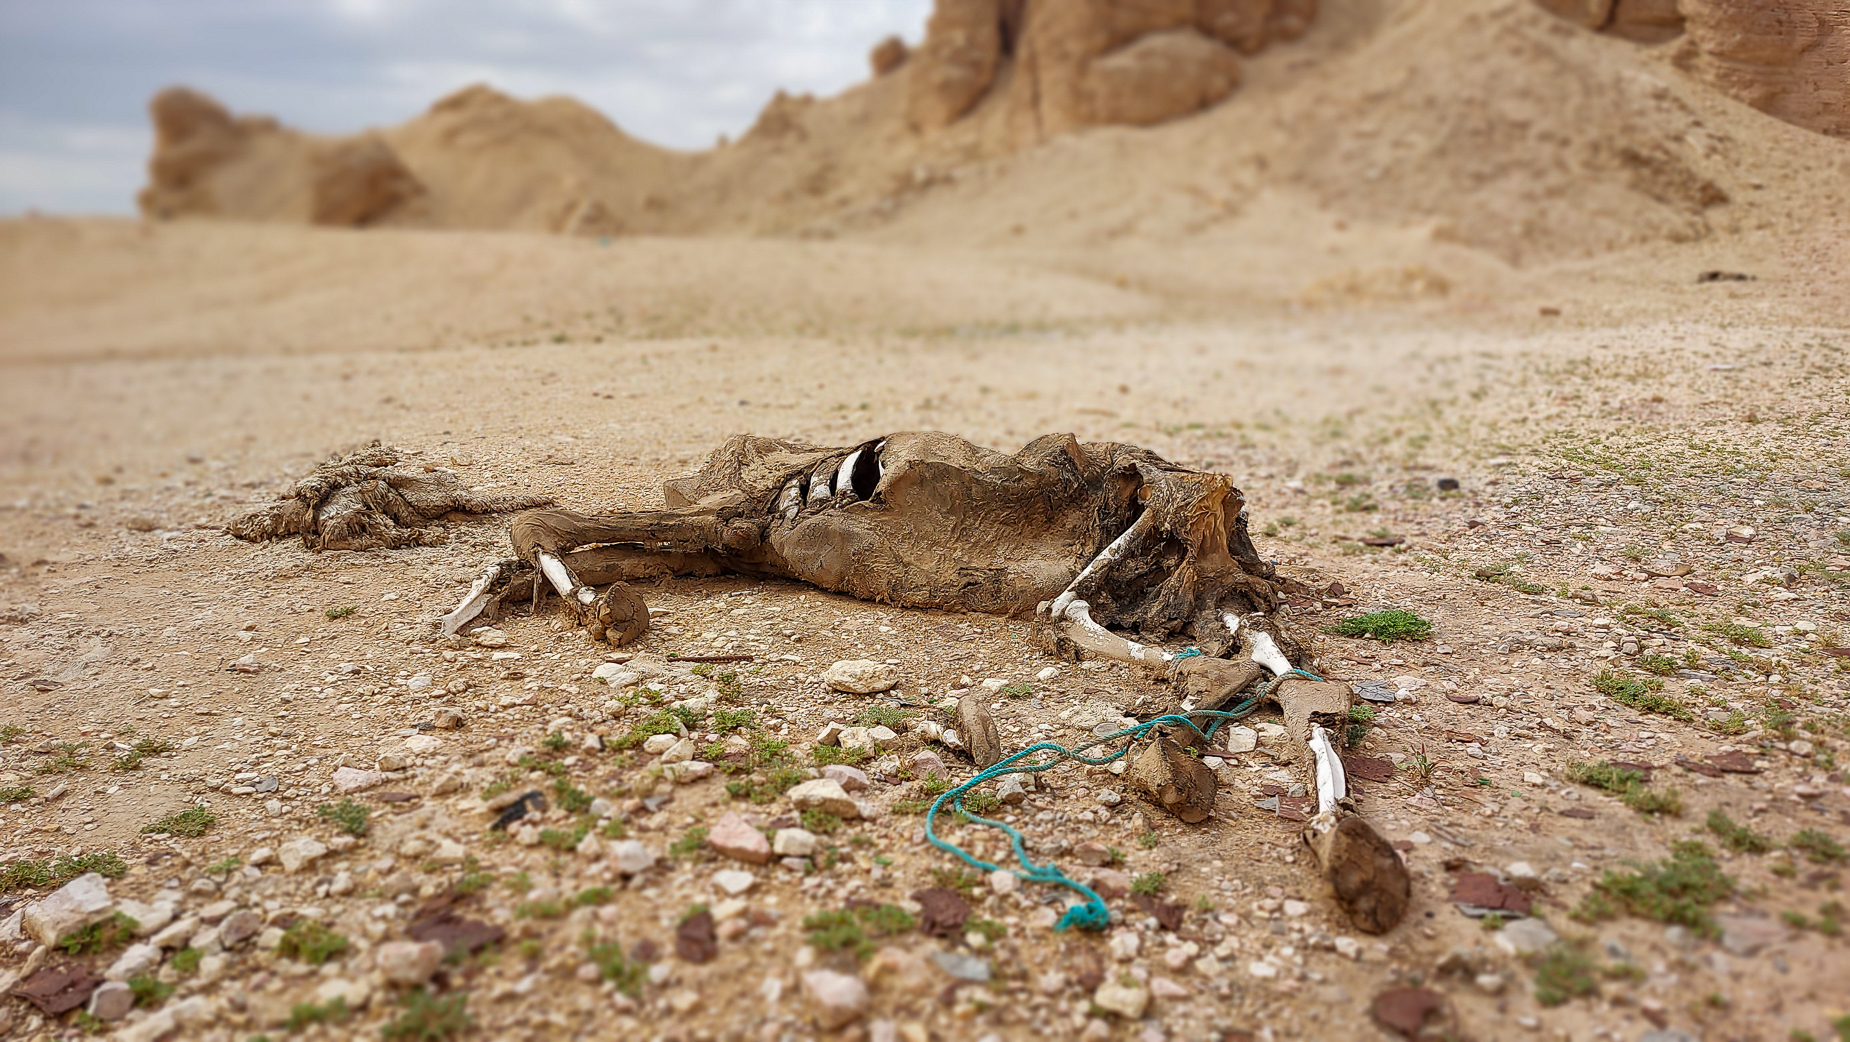 <span  class="uc_style_uc_tiles_grid_image_elementor_uc_items_attribute_title" style="color:#ffffff;">dromedary: if dead, they often are just left in the desert where they died</span>